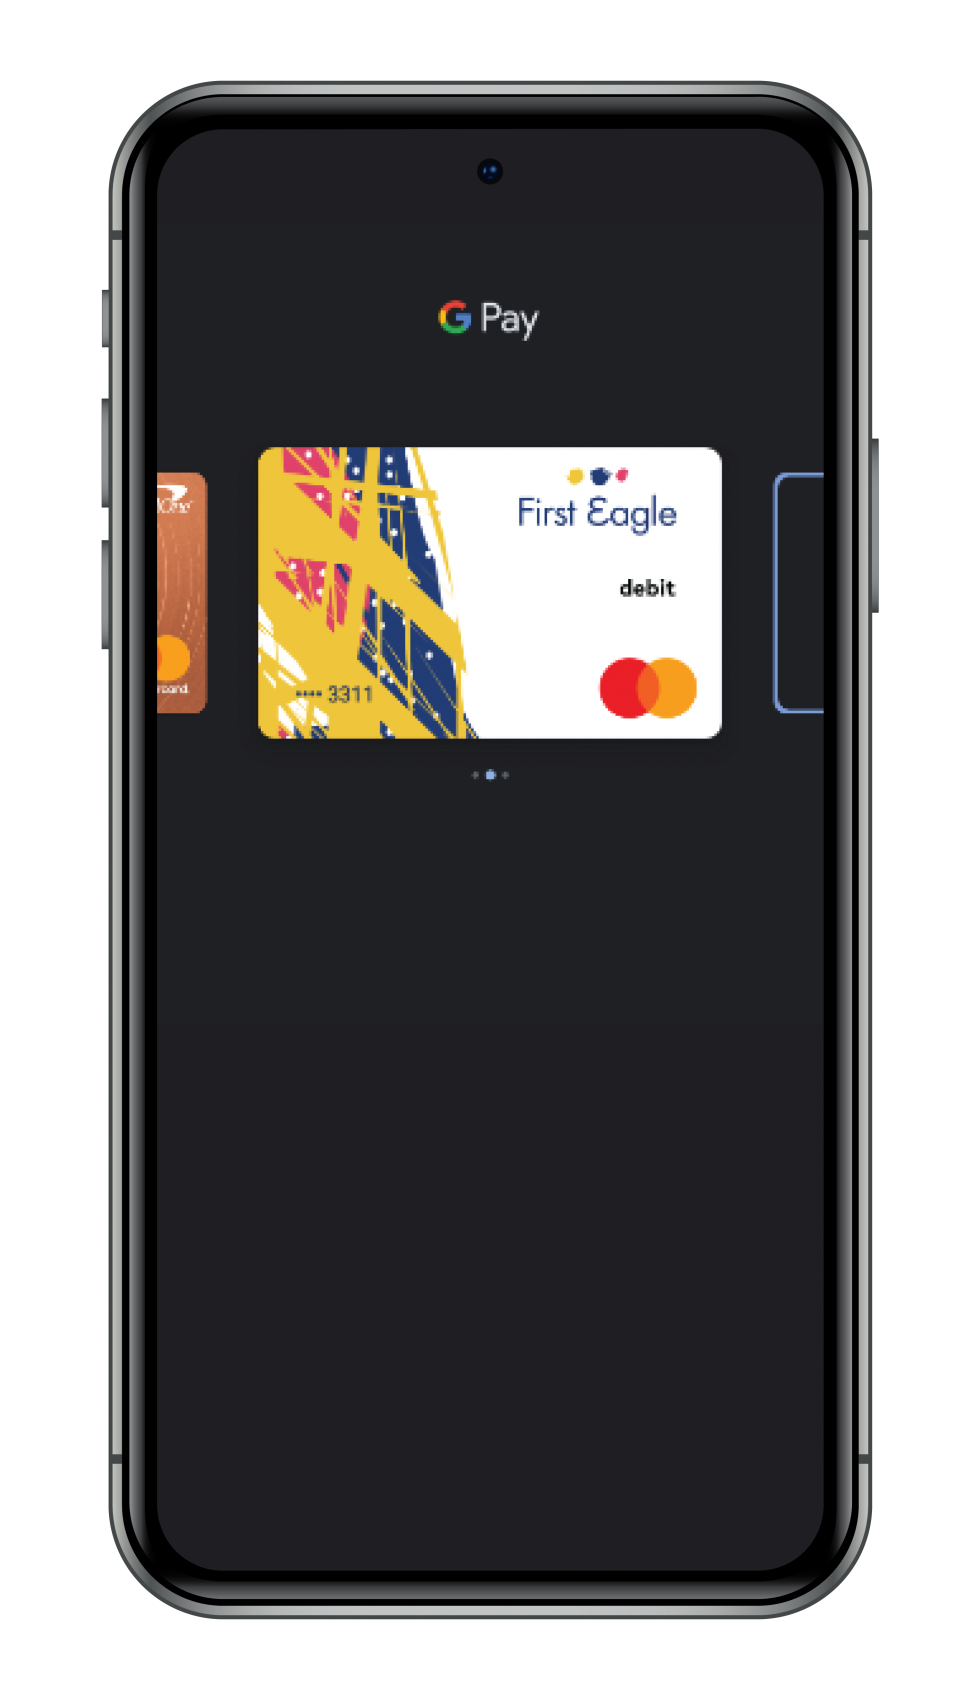 g pay wallet